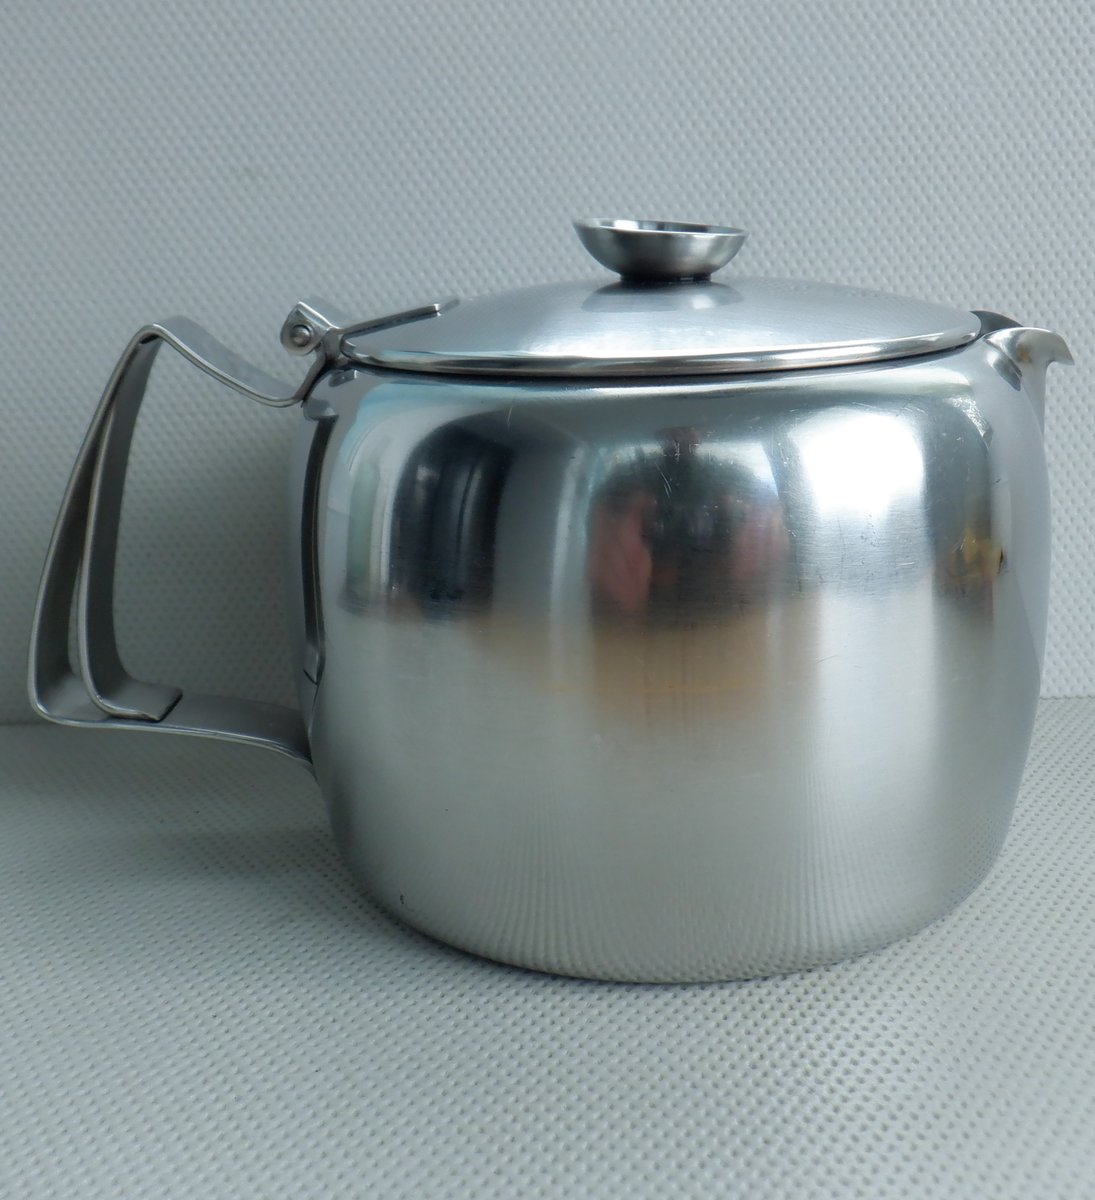 A vintage 1½ pint stainless steel teapot. Made in England by Old Hall. 🛒 ebay.co.uk/itm/1763651218… #Vintage #FollowVintage #OldHall #MadeInEngland #TeaHour #eBay